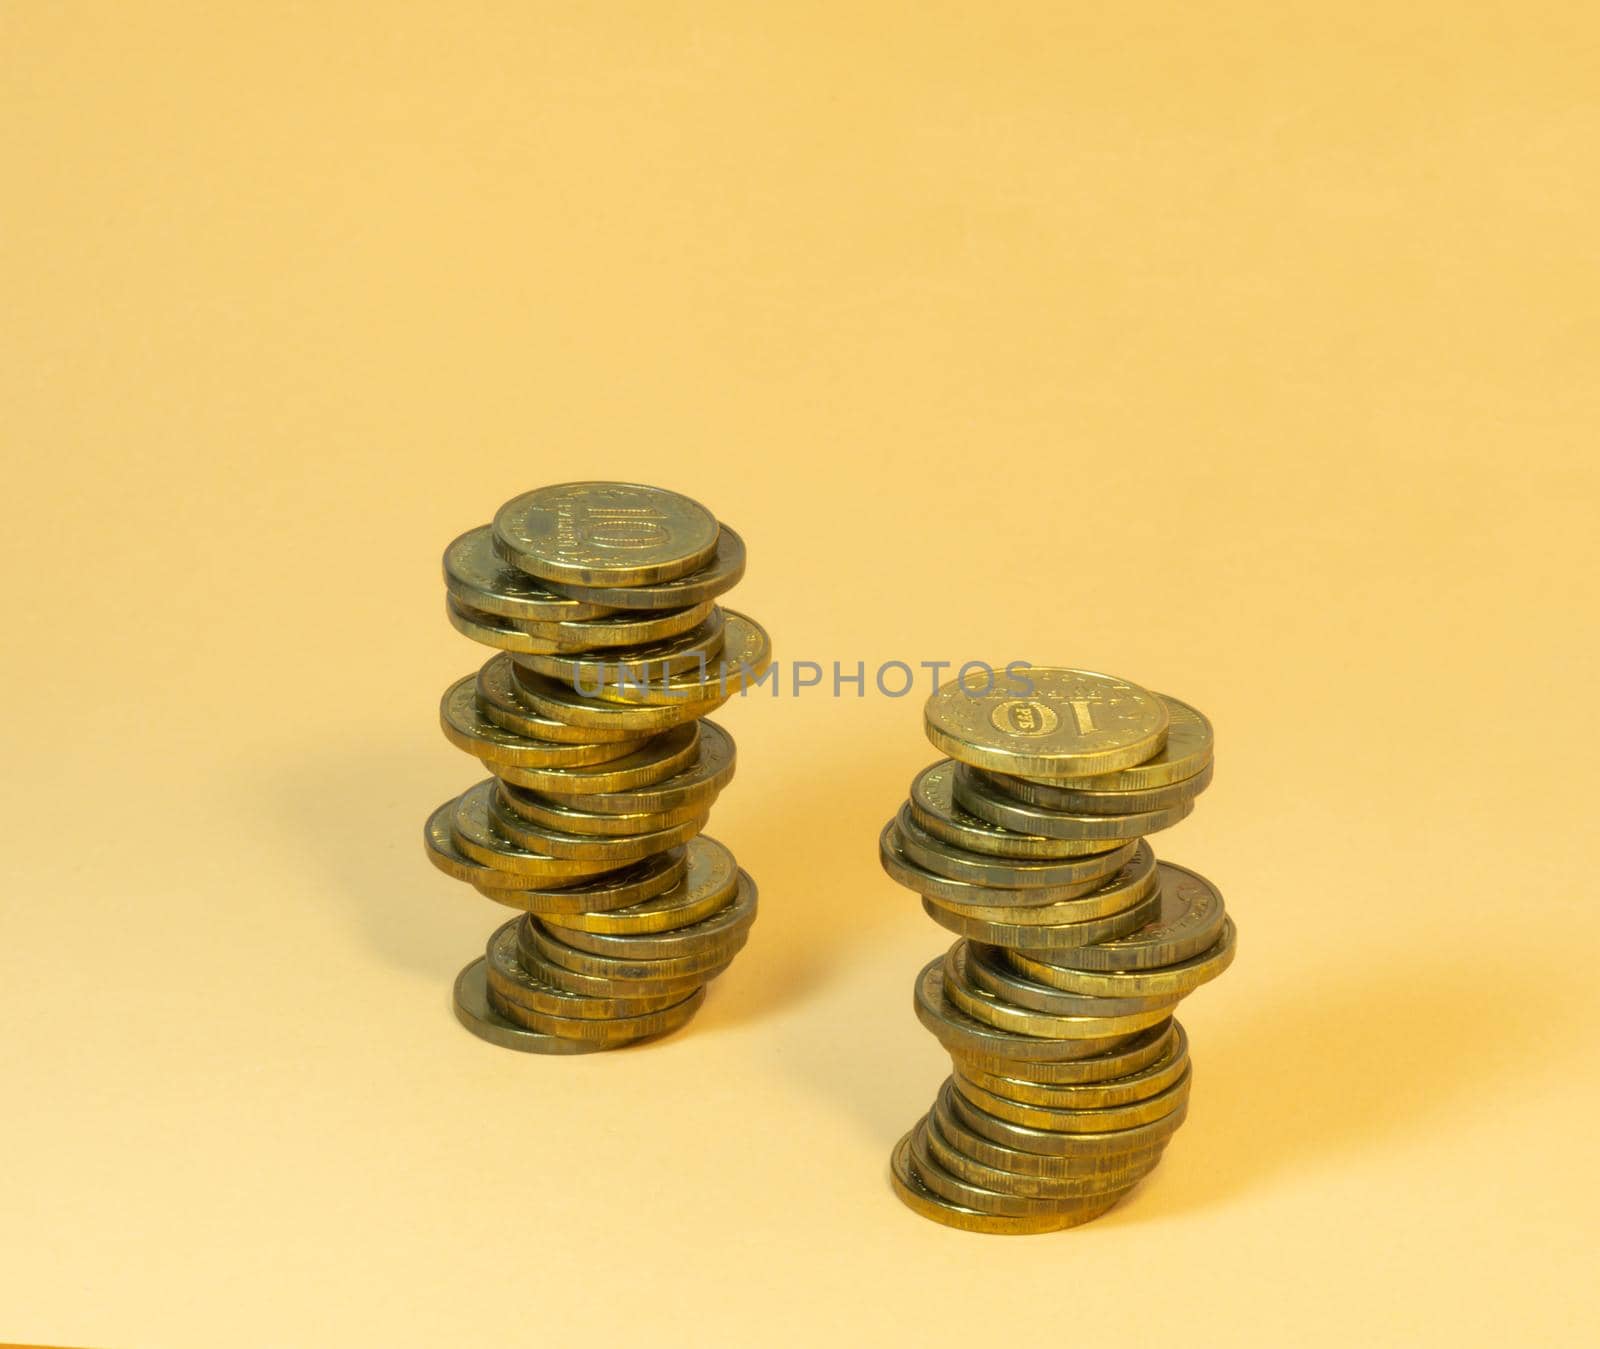 Two turrets made of coins. Money on yellow background by Puludi